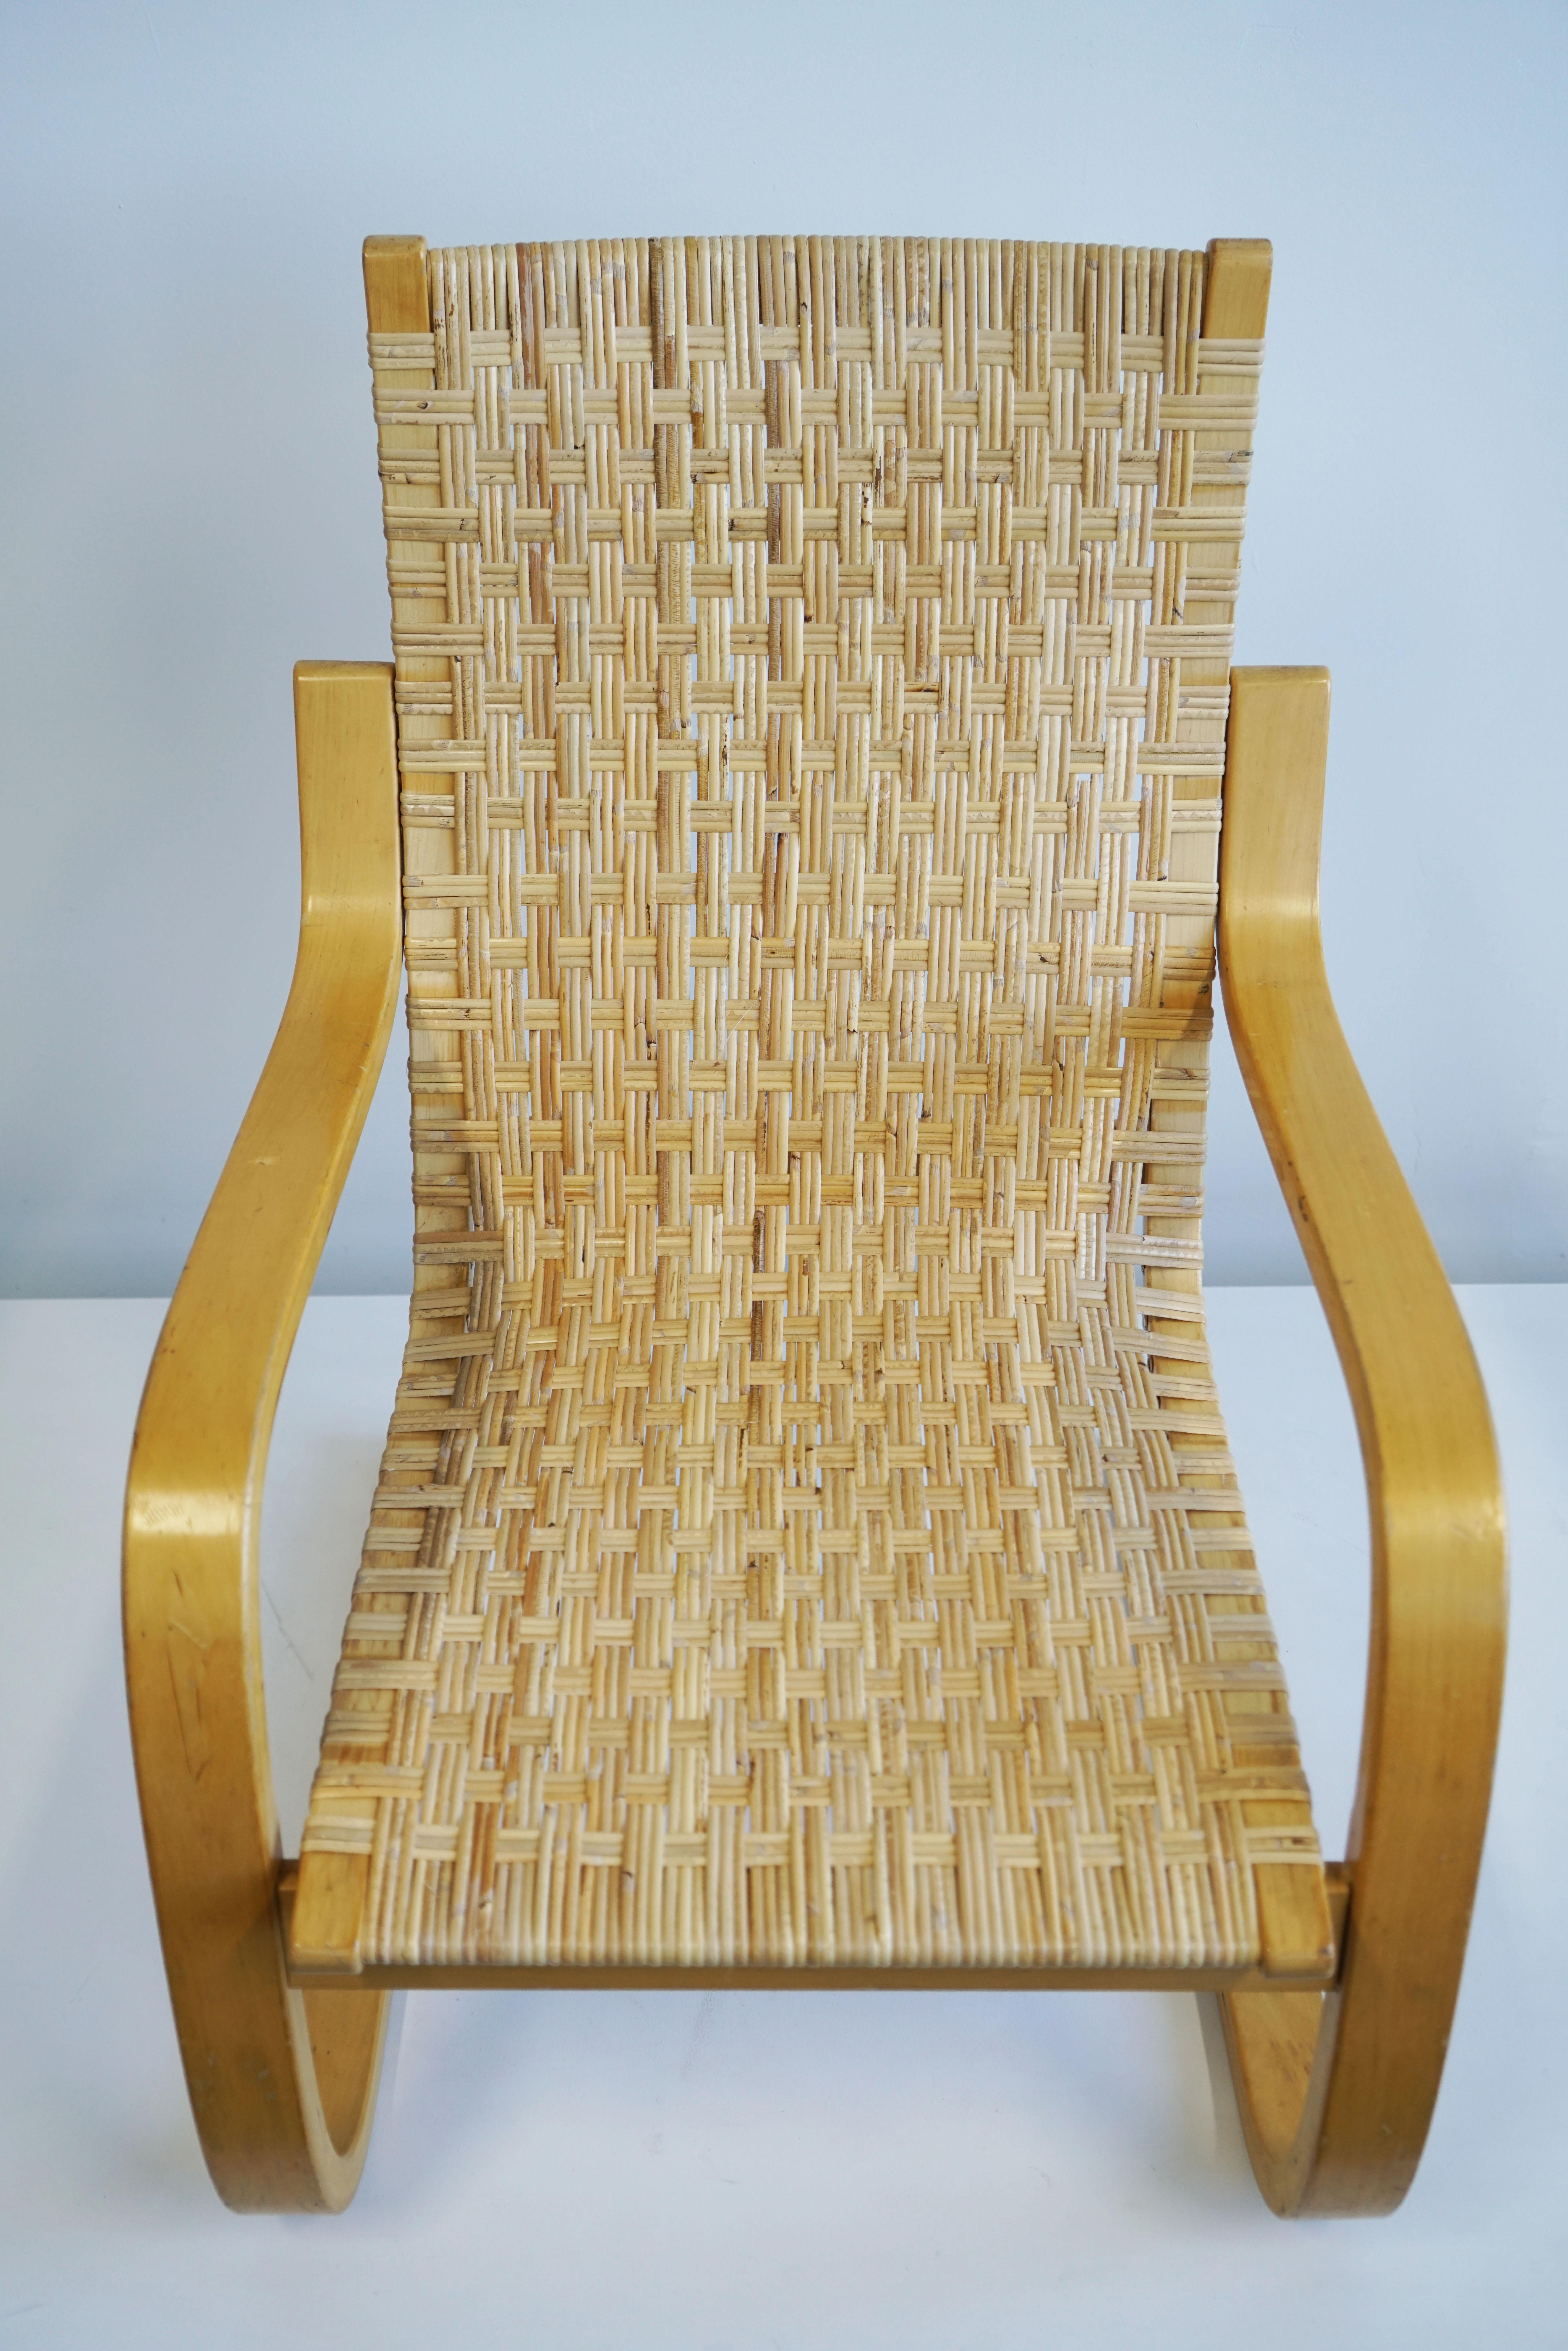 1960 Alvar Aalto Cantilever Chair Model 406 by Artek in Birch and Cane Webbing For Sale 1